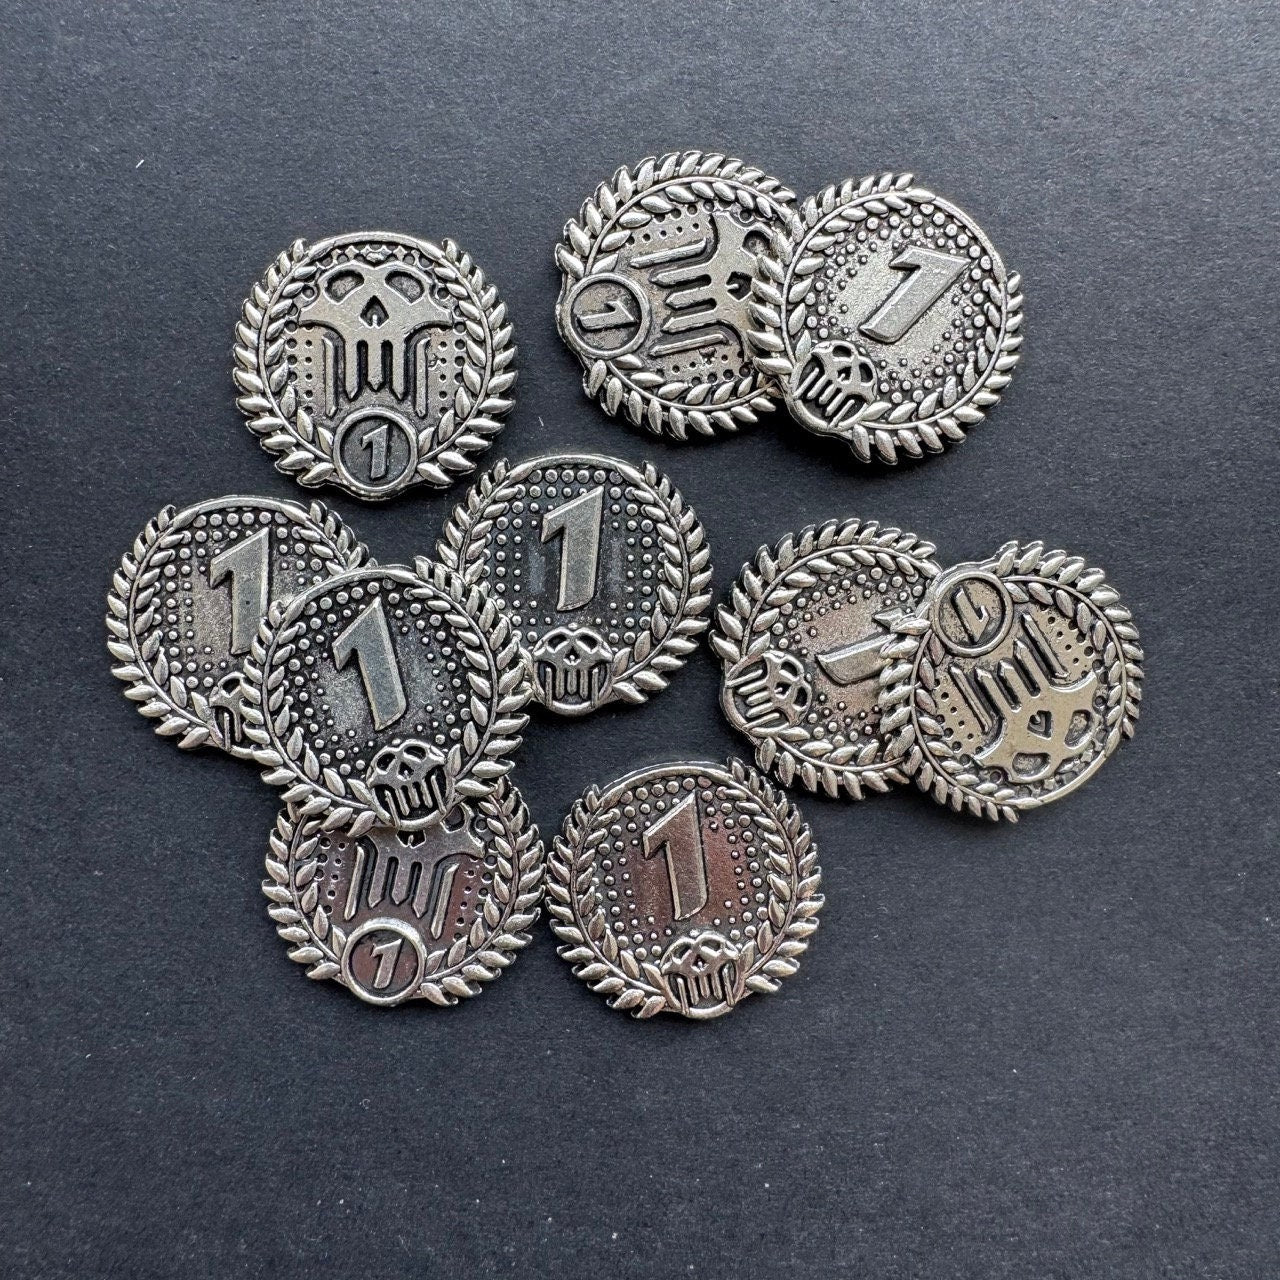 Generic Tokens, Board Game Money Coins, Cthulhu Themed Metal Coin (Double-Sided)